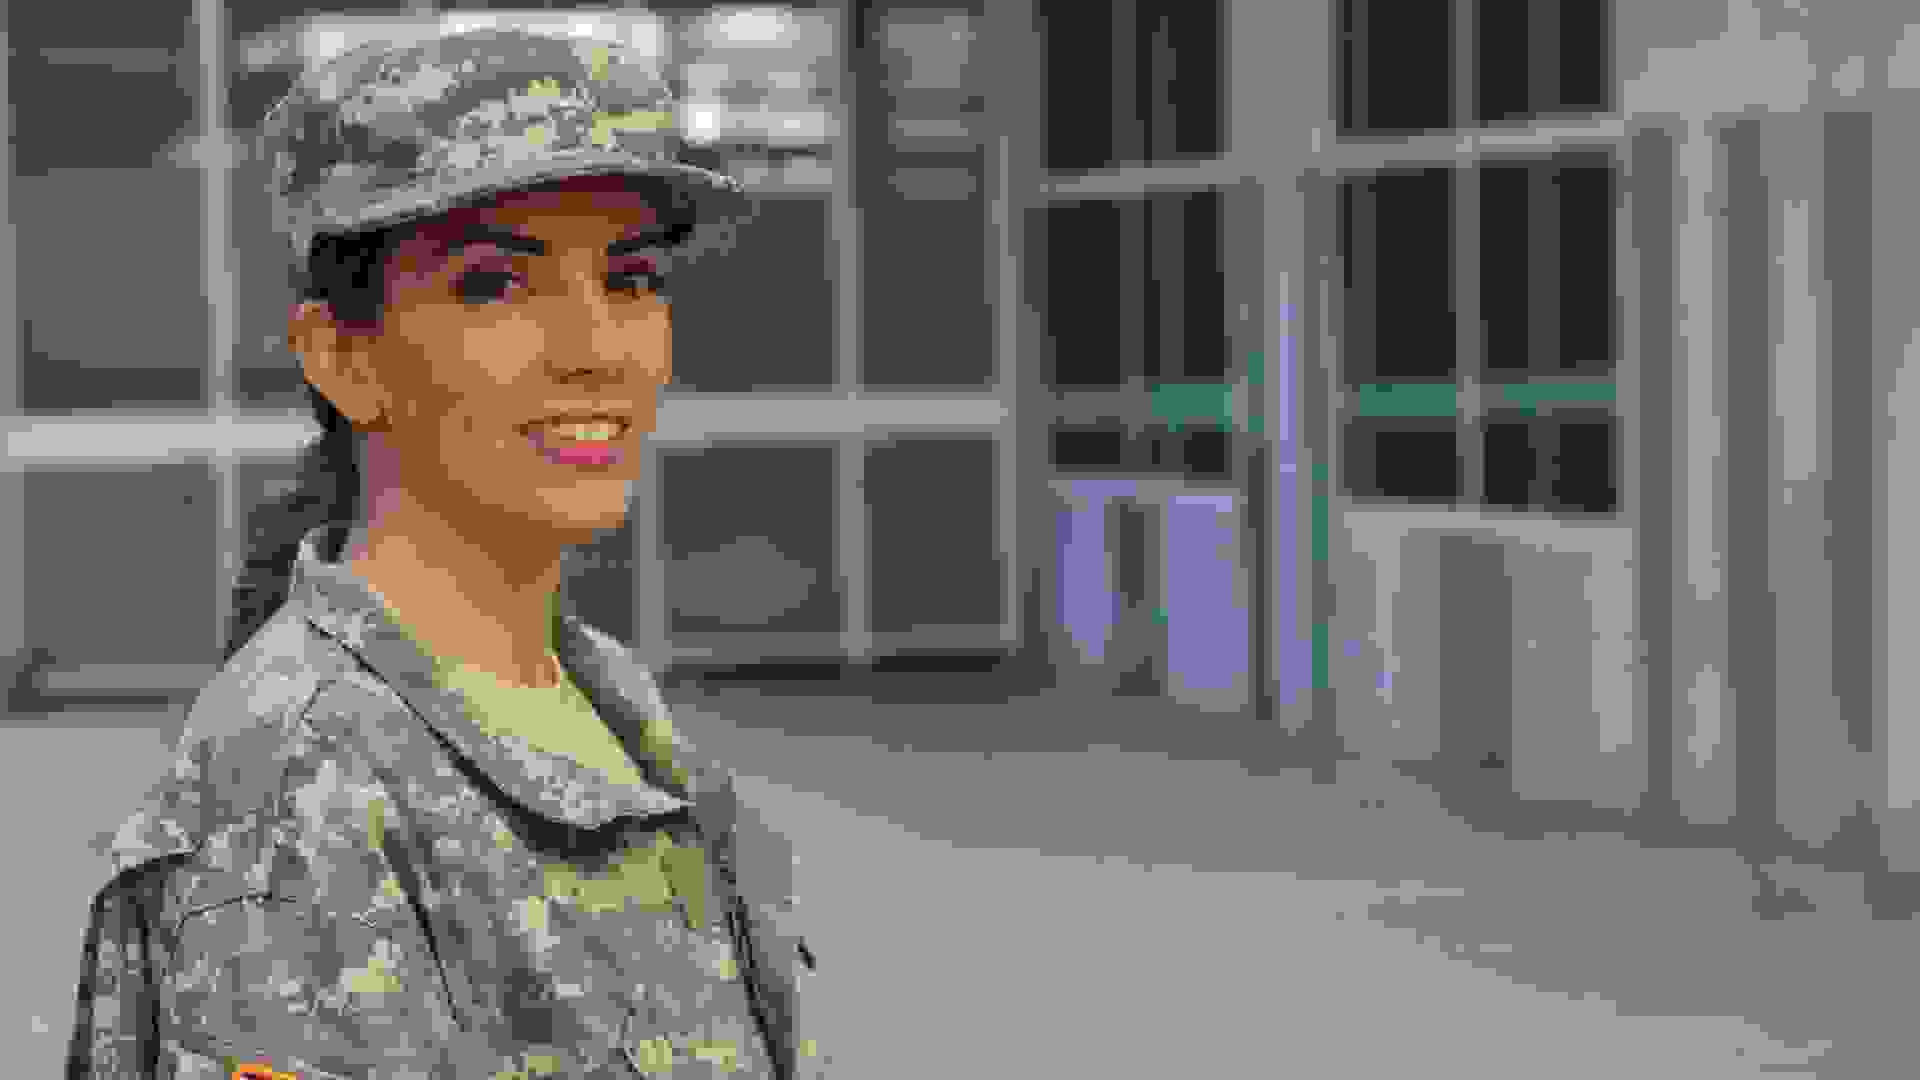 Military female smiling - Stock image with copy space.